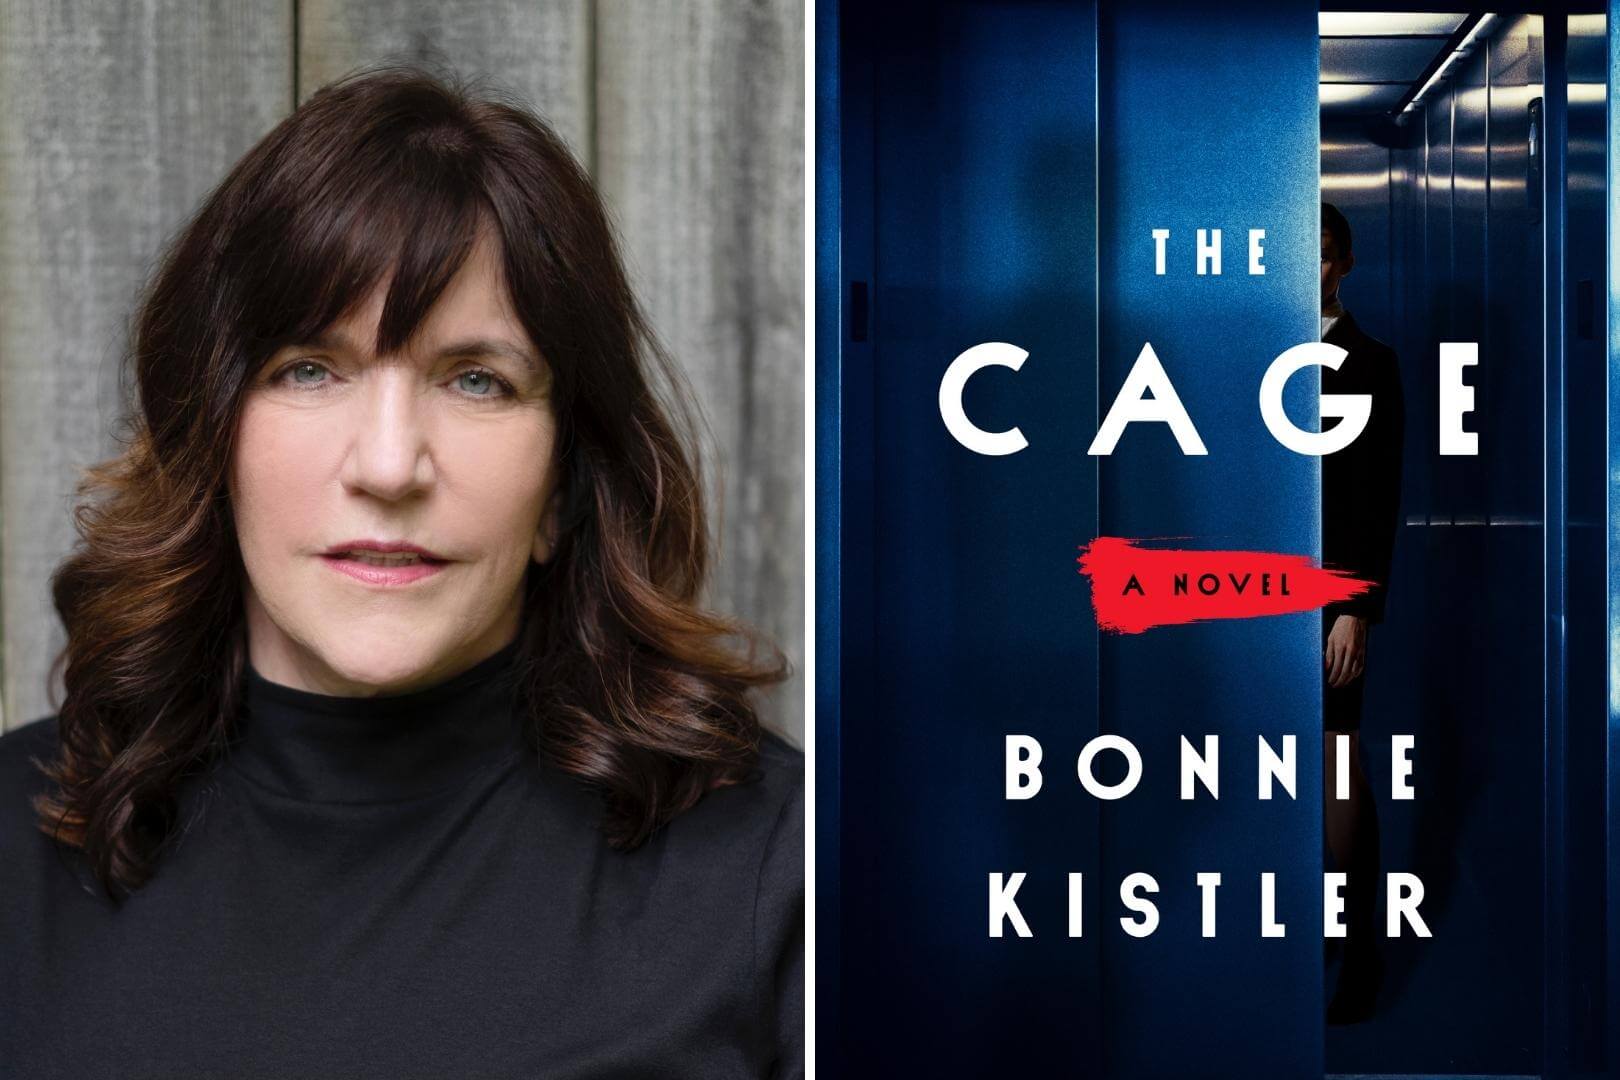 Q&A with Bonnie Kistler, Author of The Cage